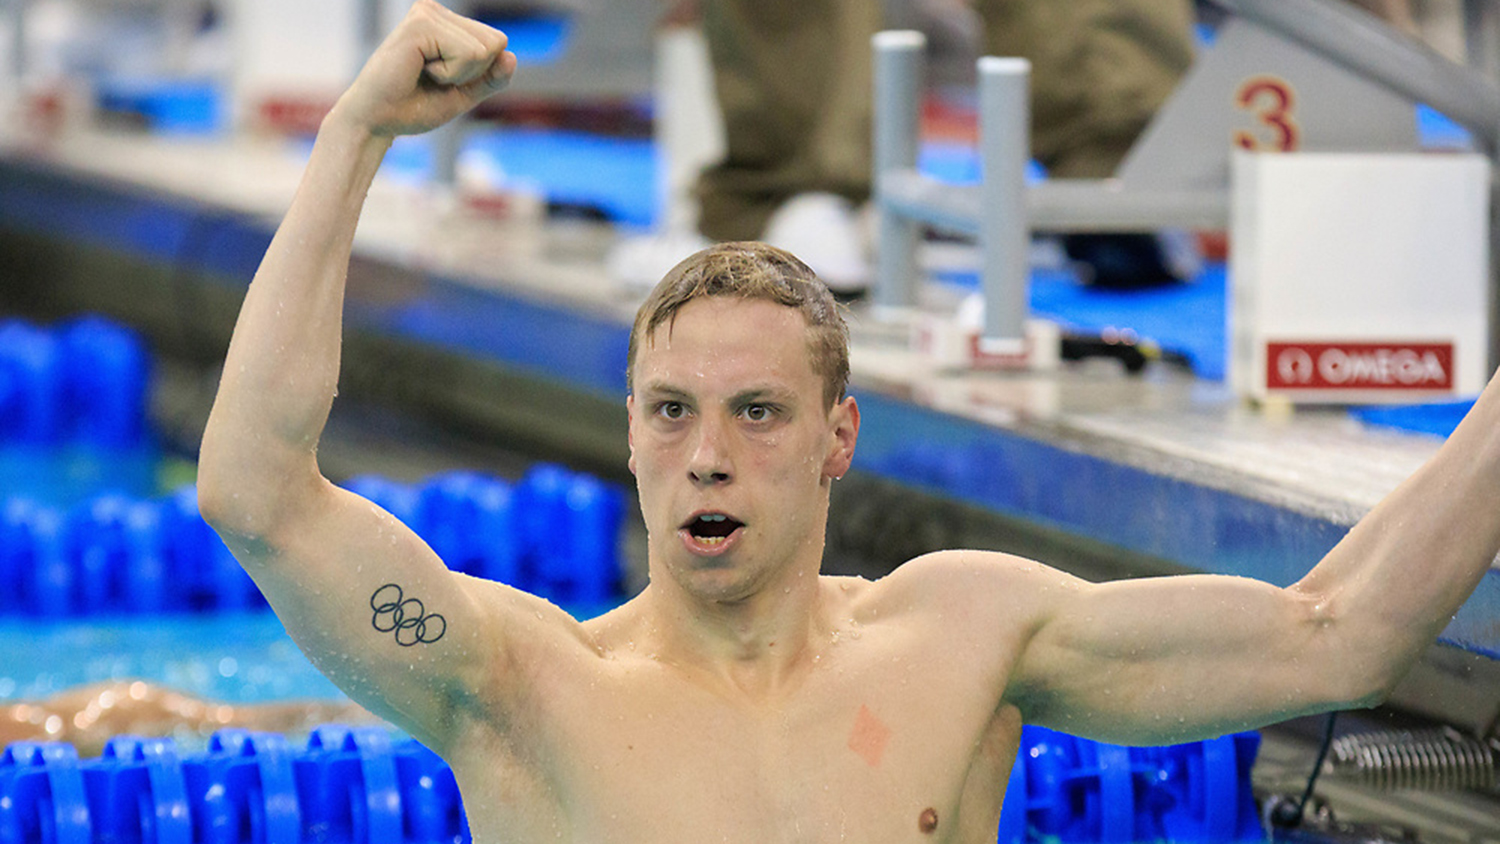 Anton Ipsen in the pool with his fist raised in a victory salute.